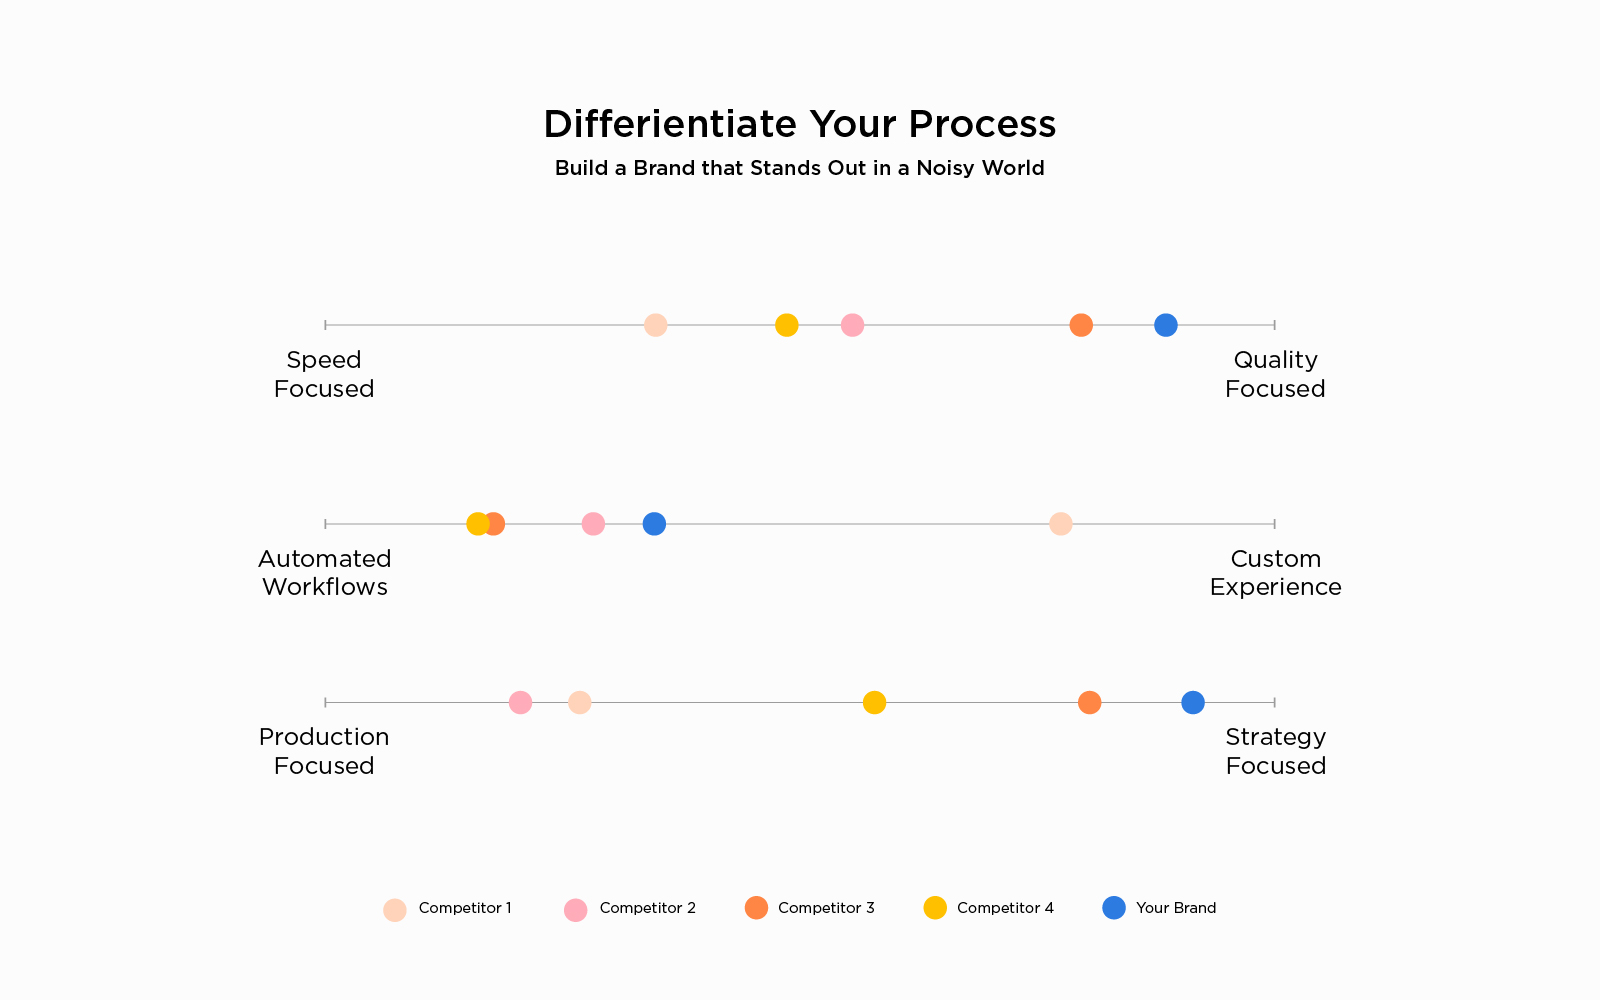 Differentiating your process positioning chart for small business owners who want to stand out from their competitors.